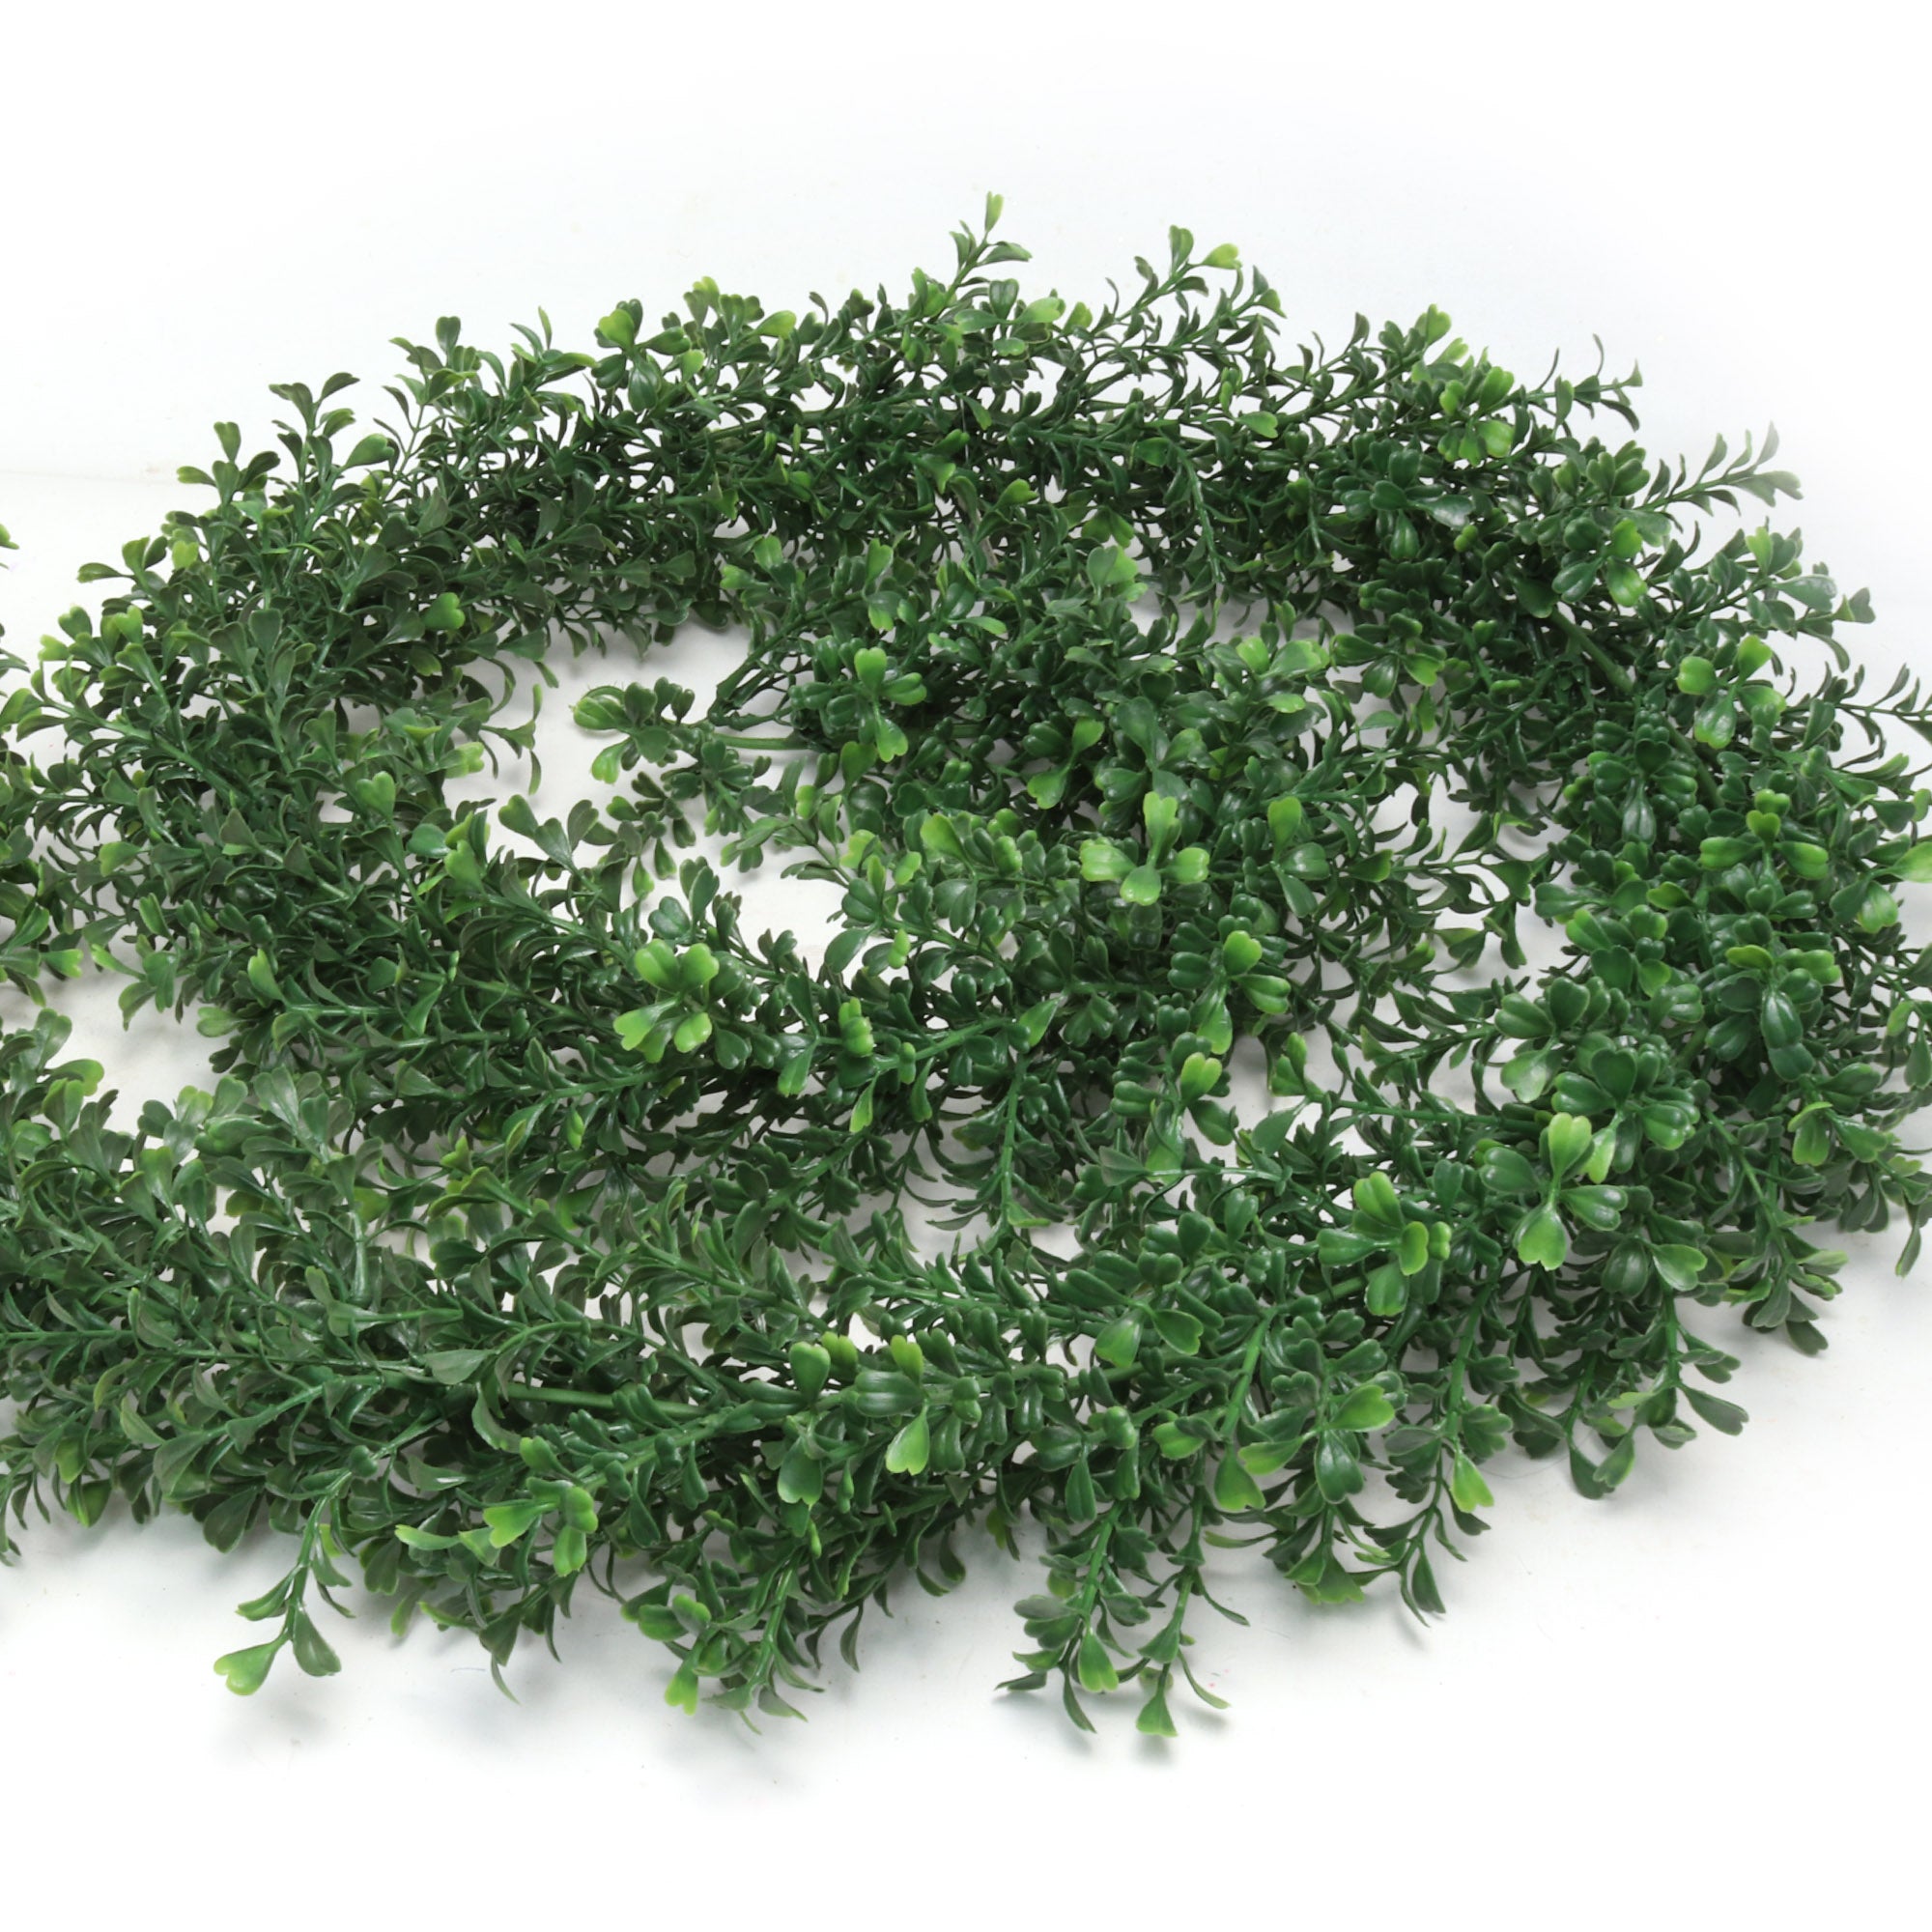 9ft Artificial Boxwood Garland with 760 Tips - Lifelike Greenery for Indoor/Outdoor Decor, Events & Weddings - Top-Quality Faux Foliage Design